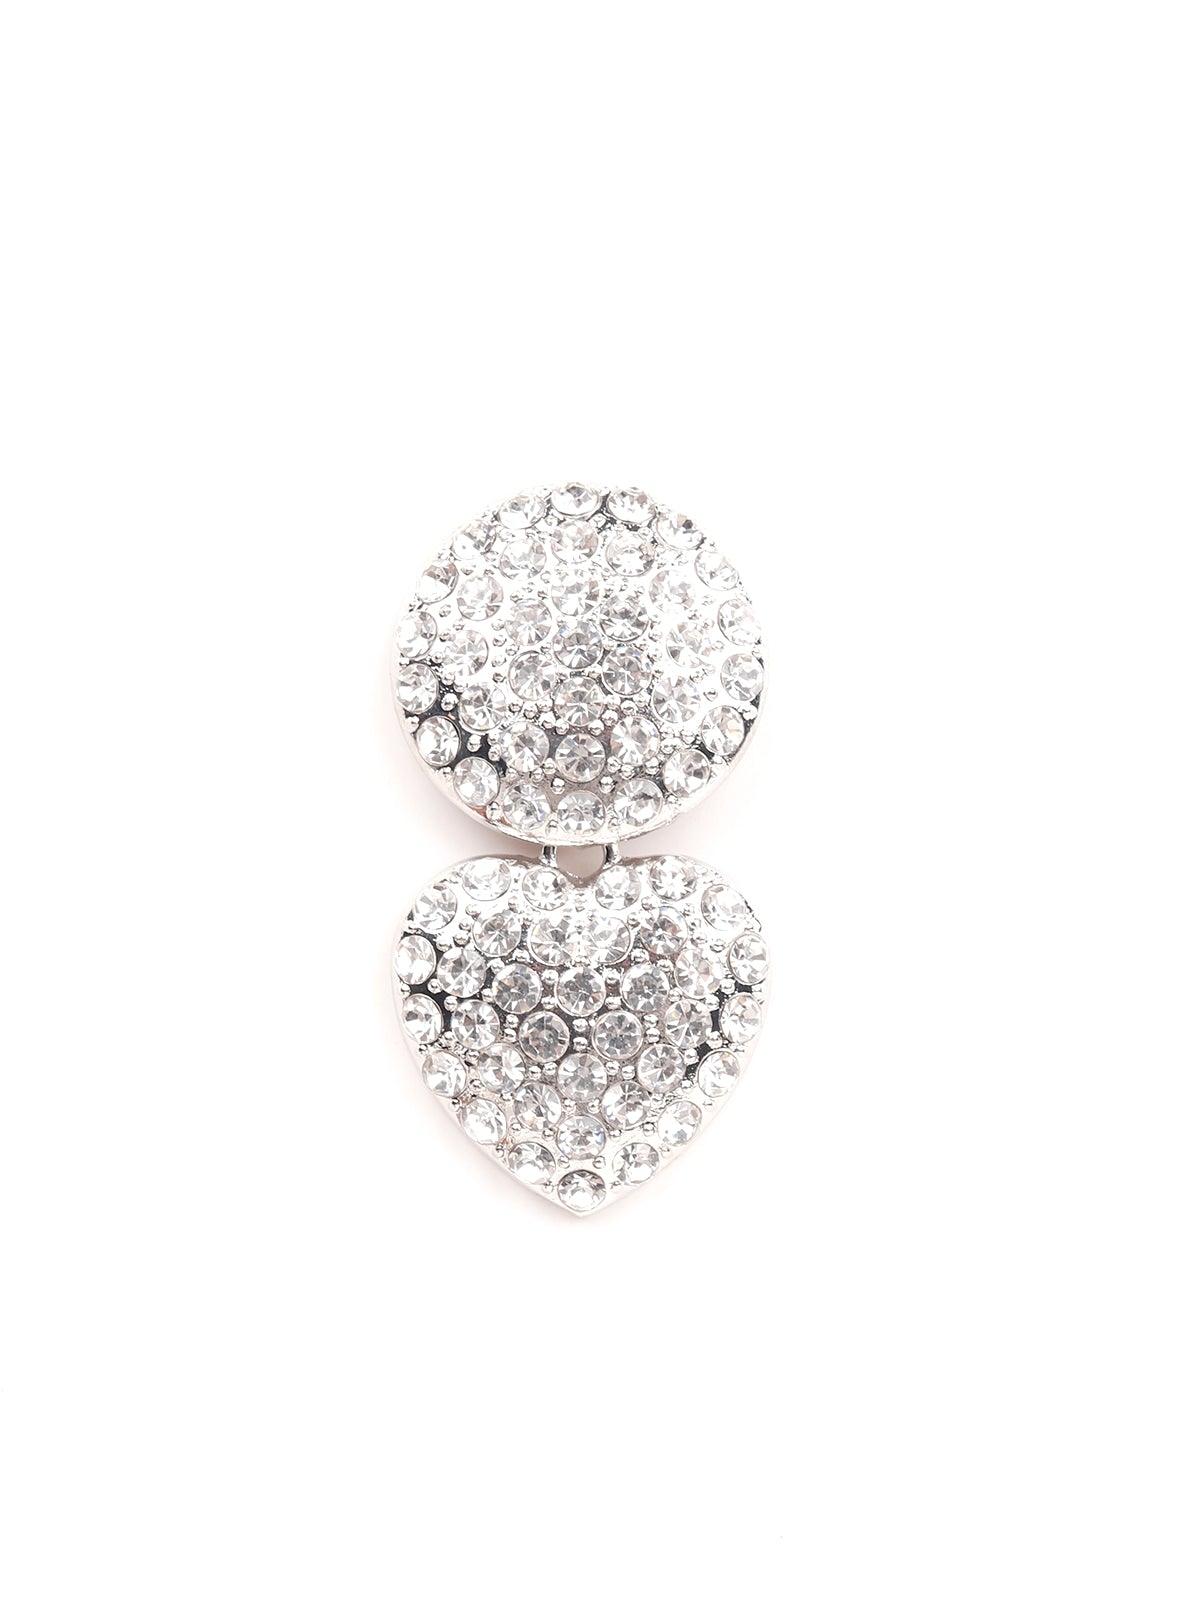 Women's Fully Studded Rounded And Heart-Shaped Crystal Earrings - Odette